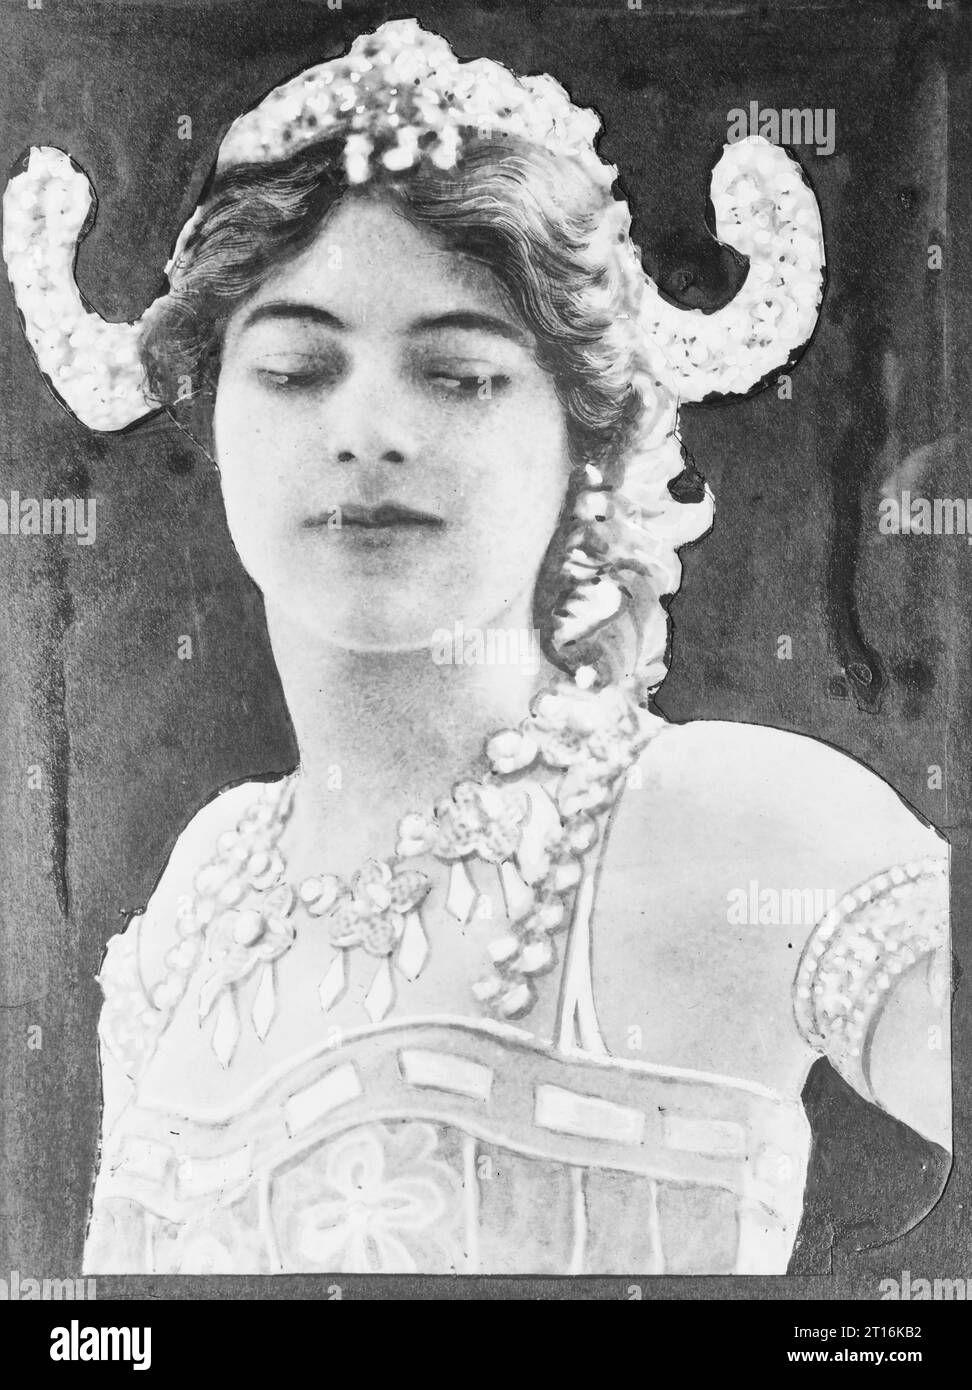 Mata Hari (Lady Macleod) - Photograph shows Margaretha Geertruida 'Margreet' MacLeod (1876-1917), known by the stage name Mata Hari, exotic dancer and courtesan who was convicted of being a spy during World War I Stock Photo